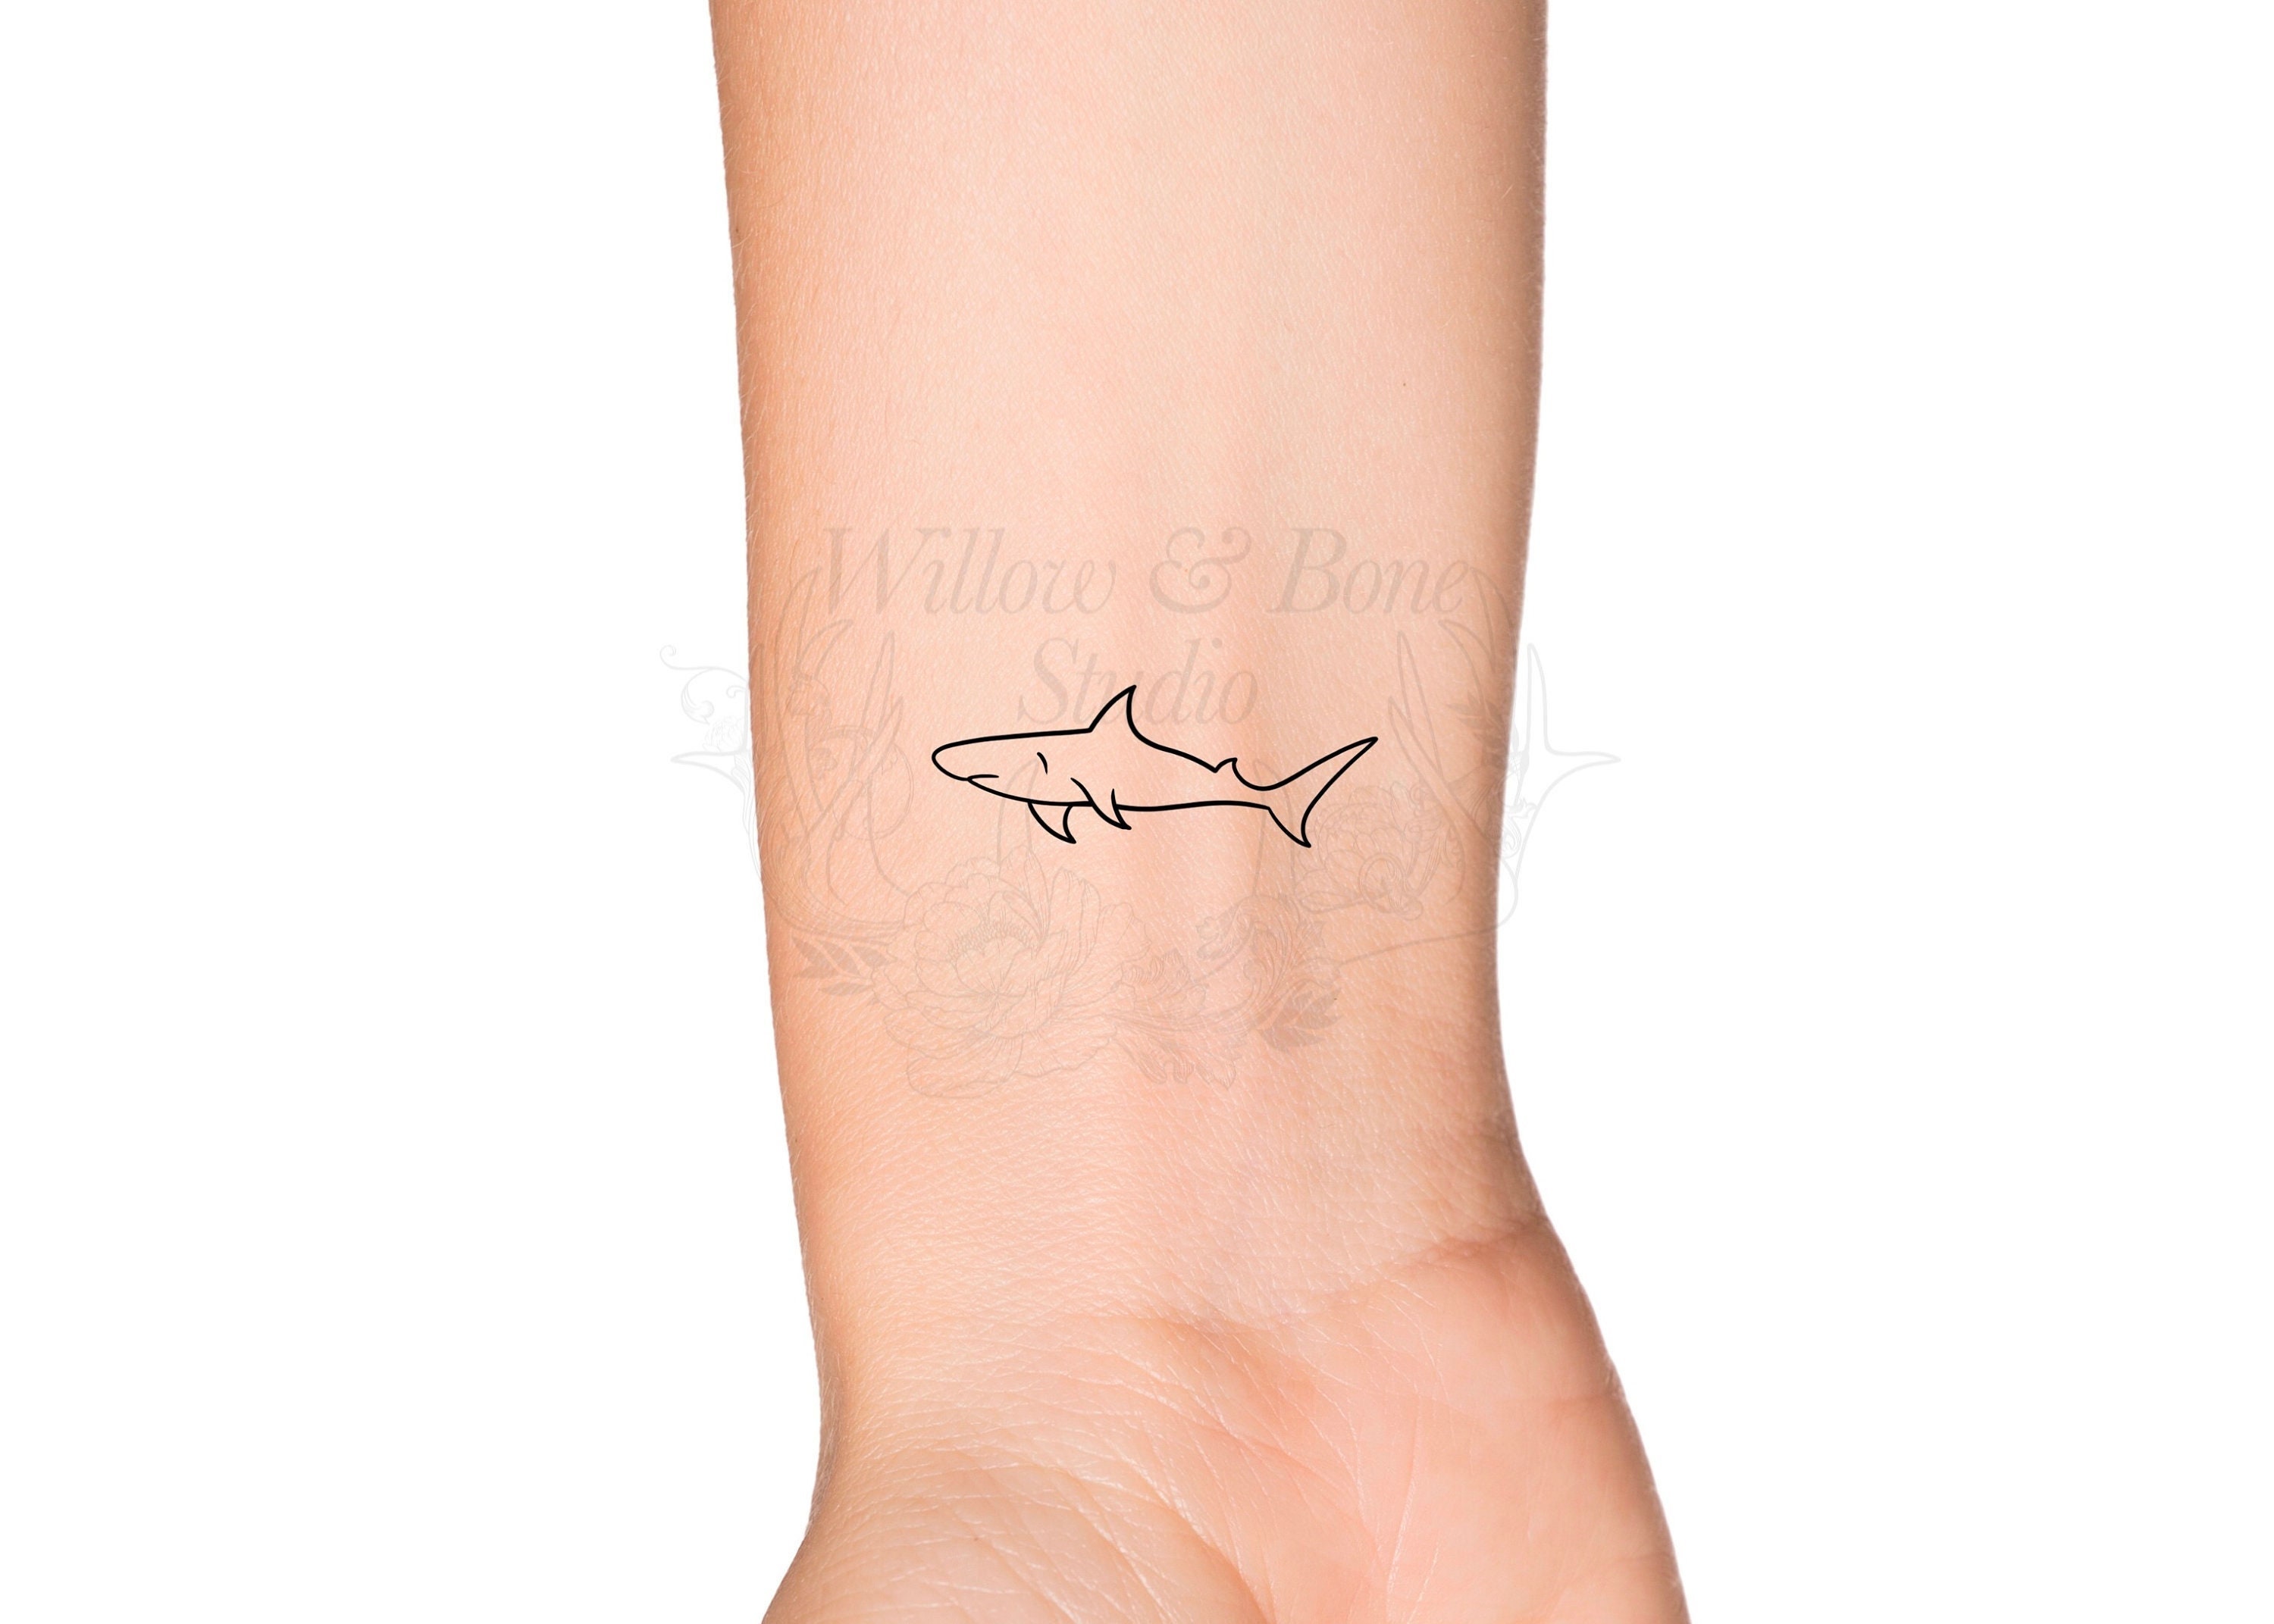 10 Best Small Shark Tattoo IdeasCollected By Daily Hind News